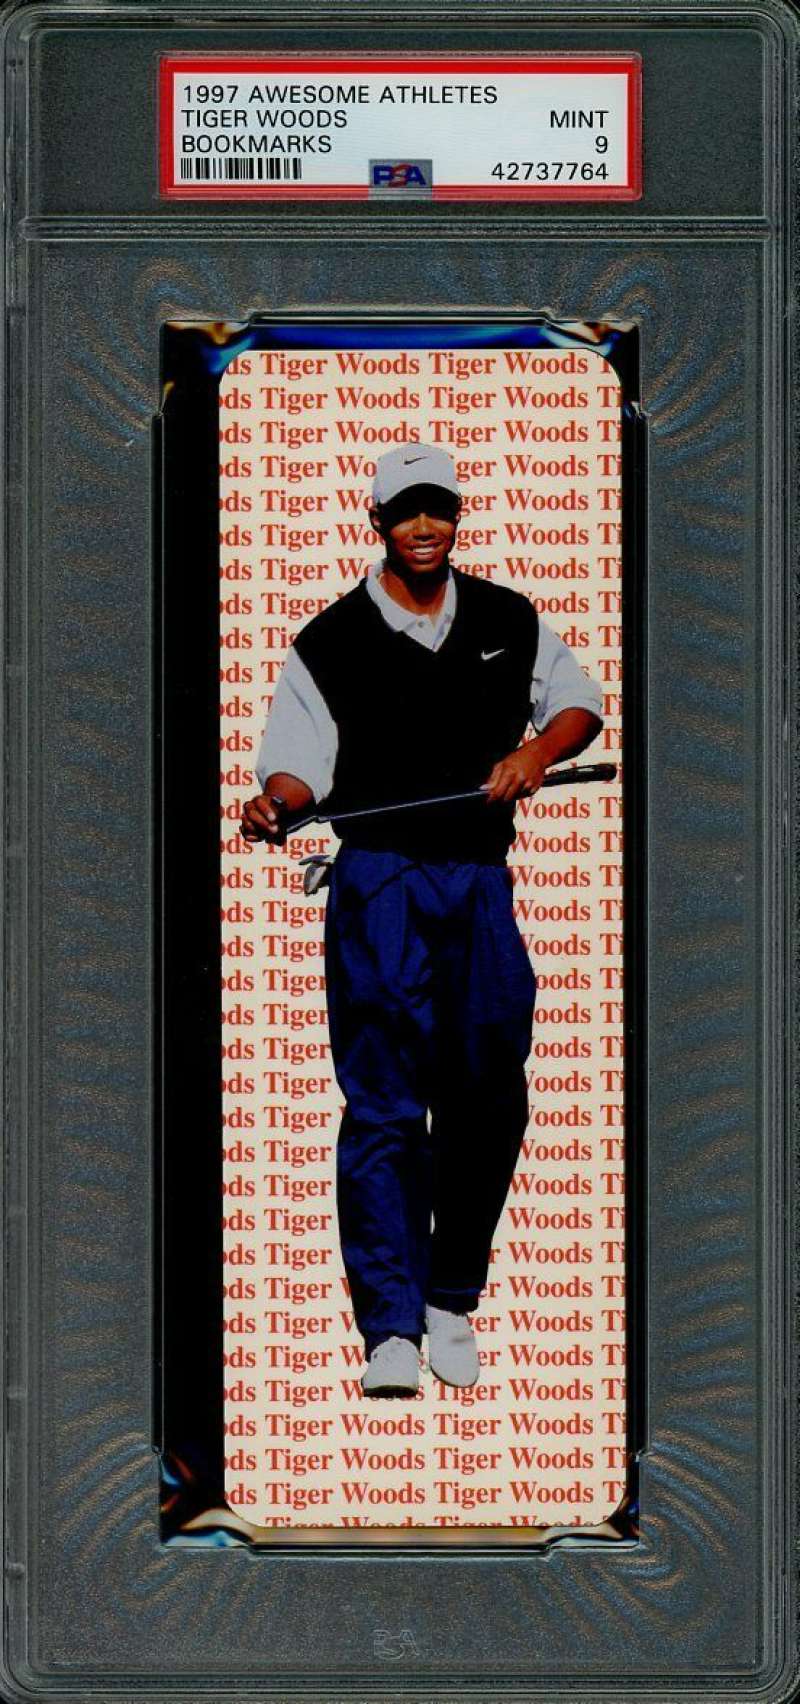 1997 Awesome Athletes Tiger Woods Book Marks Rookie Card Graded PSA 9 Mint   Image 1